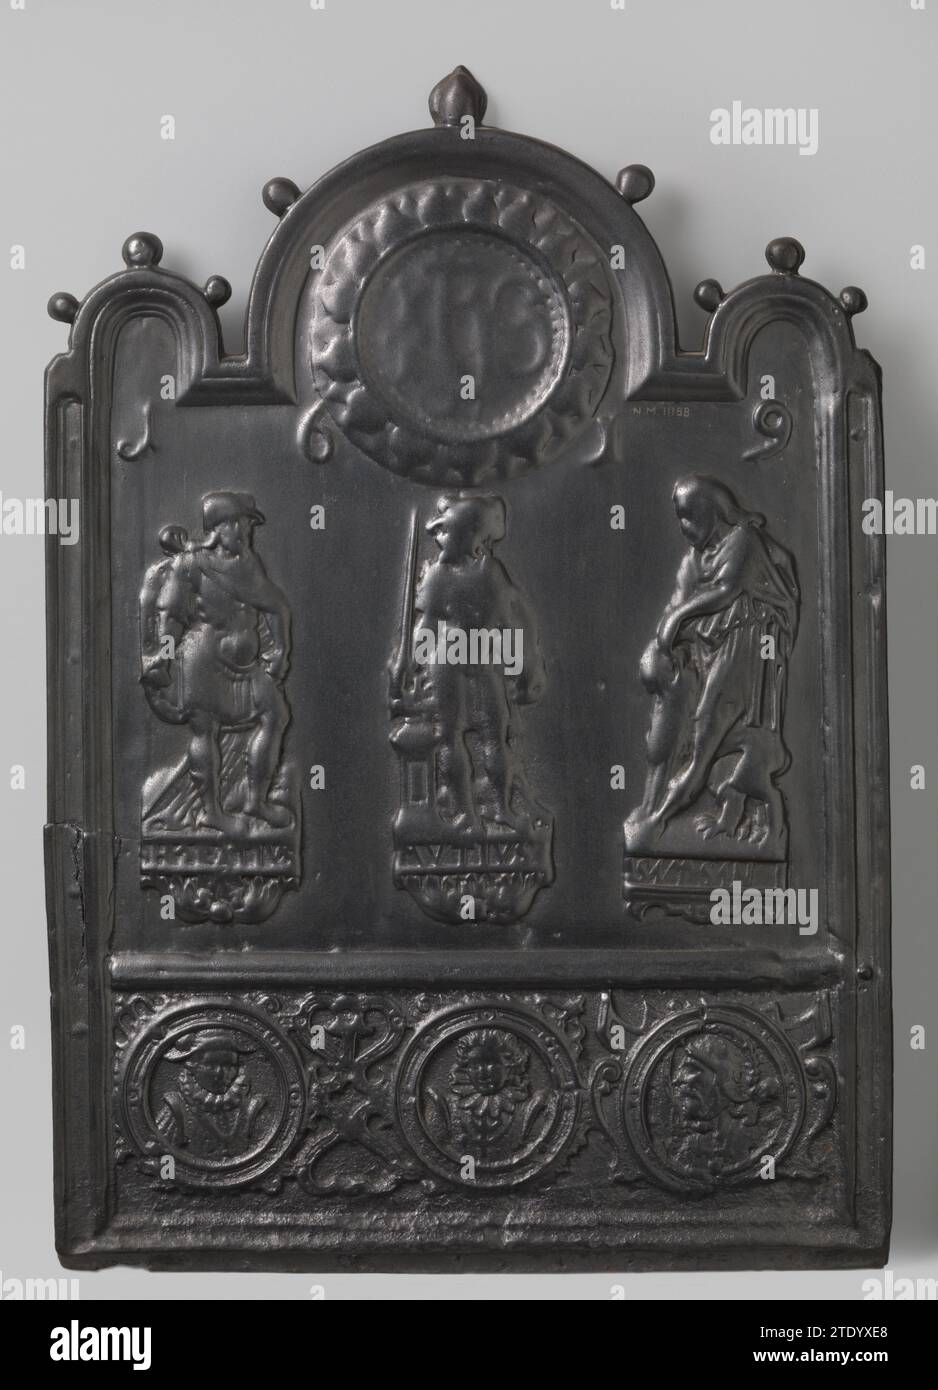 Haardplaat met Haracius, Meme en Samson, anonymous in or after c. 1619 Cast iron fireplace, consisting of two zones. In the upper zone there is a medallion with the letters IHS and immediately below the year 1619. Below three male figures standing on a console with their name, respectively Horace Cocles, Gaius Mucius Scaevola and Samson. In the lower zone three medallions with bustes separated from each other by rankwork. The two left medallions show a bust and face, with a man on the left and a woman on the right. The right medallion shows the bust of a man and profil. All figures and medalli Stock Photo